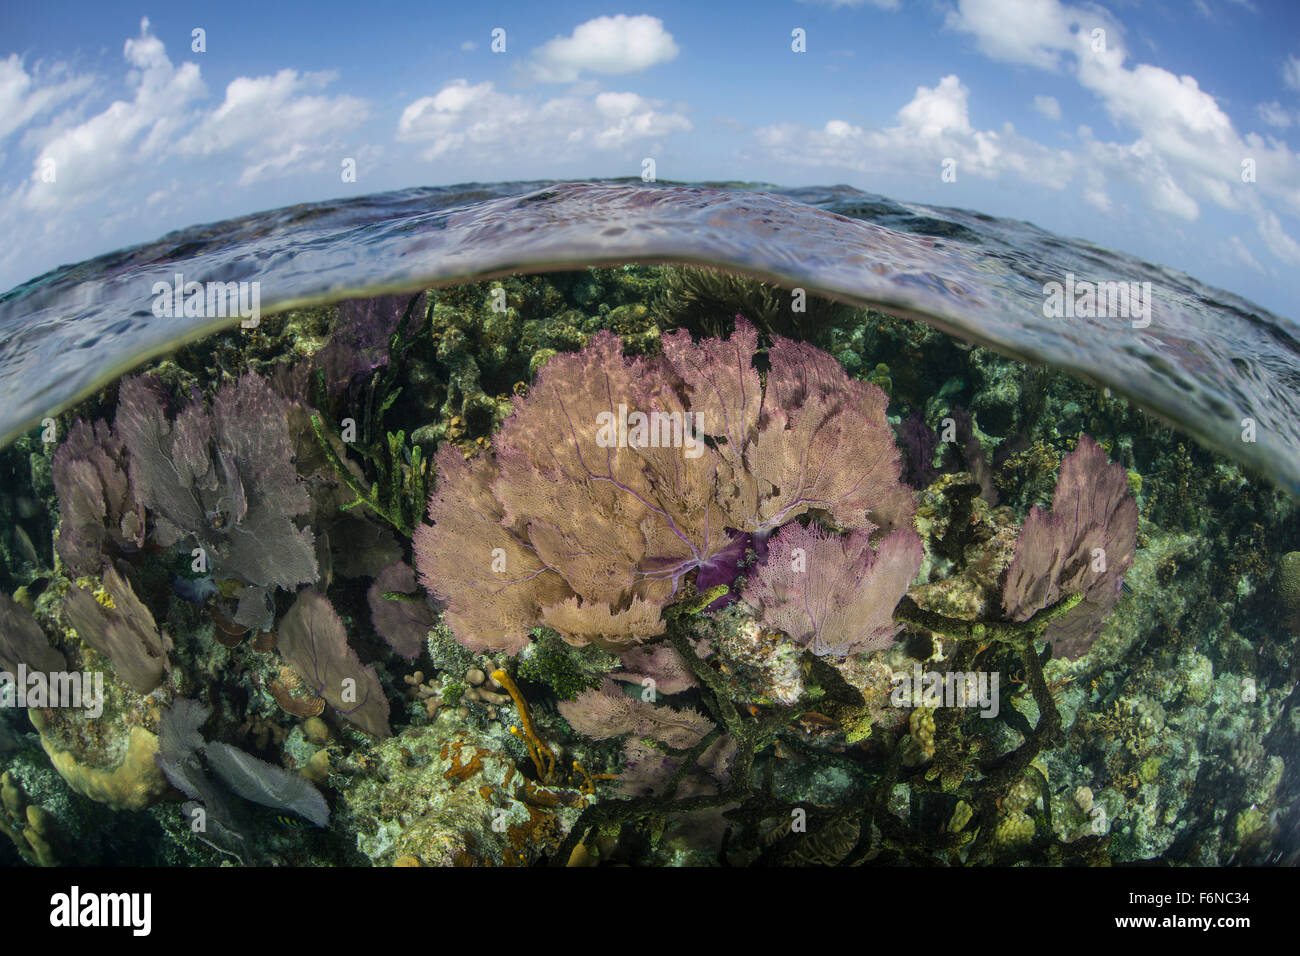 Colorful gorgonians and reef-building corals grow in shallow water near the famous Blue Hole in Belize. This part of Central Ame Stock Photo